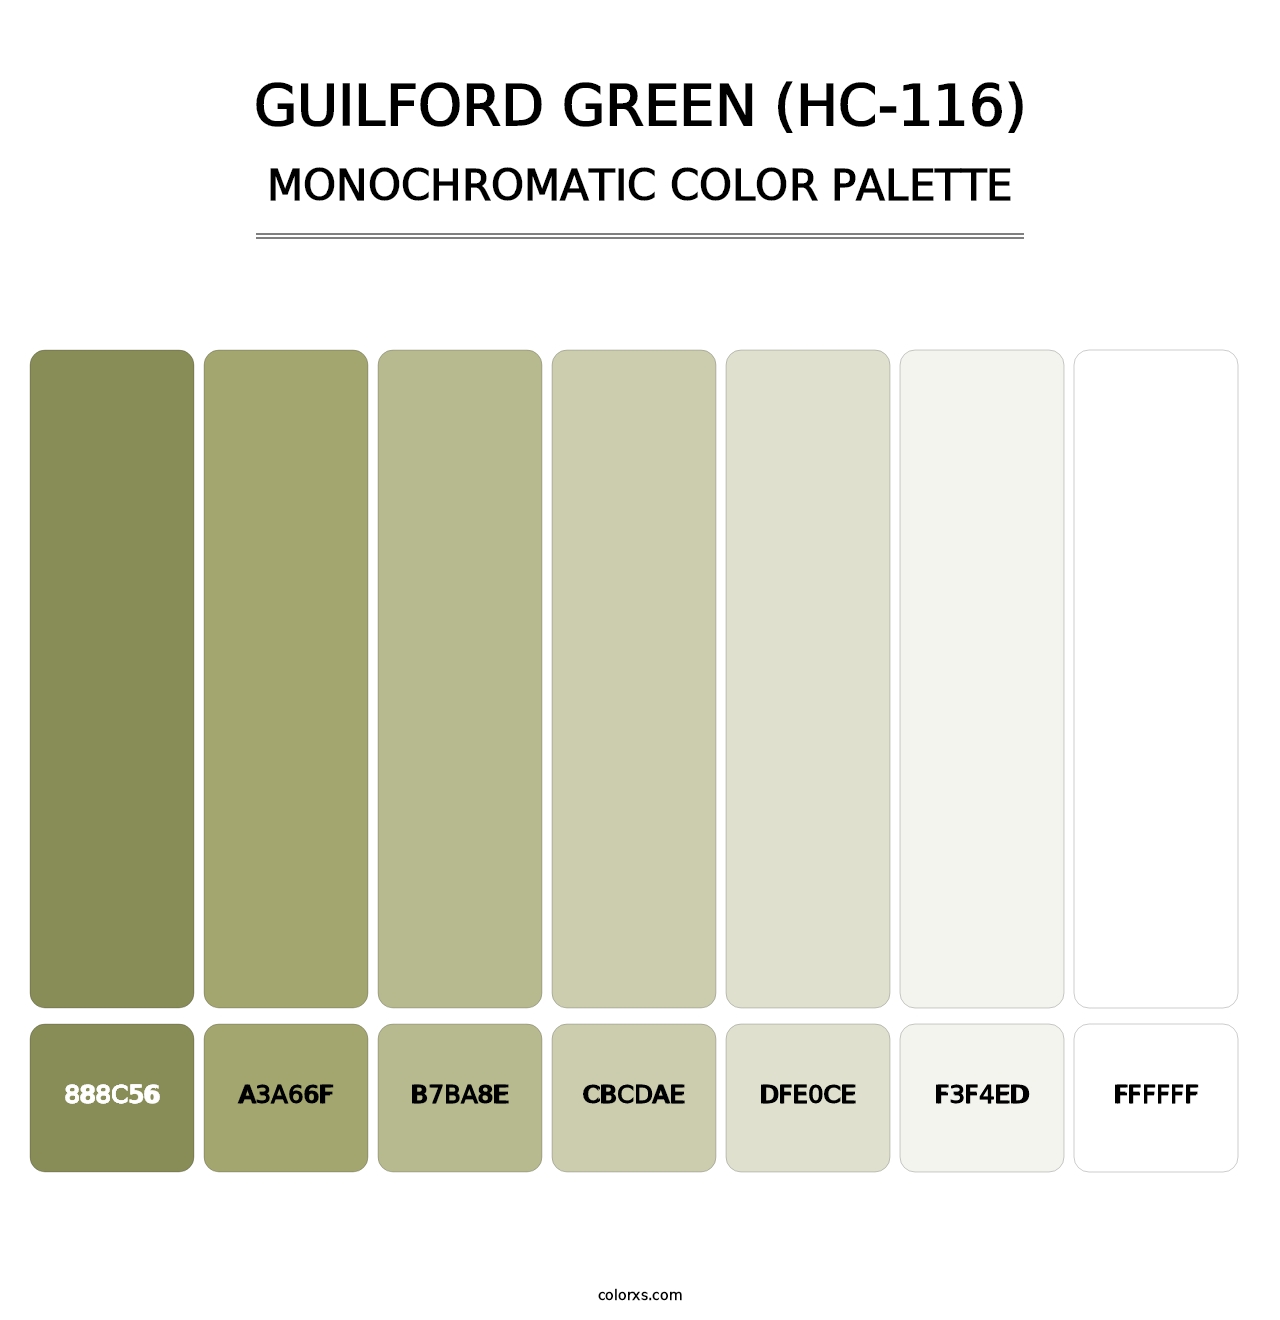 Guilford Green (HC-116) - Monochromatic Color Palette